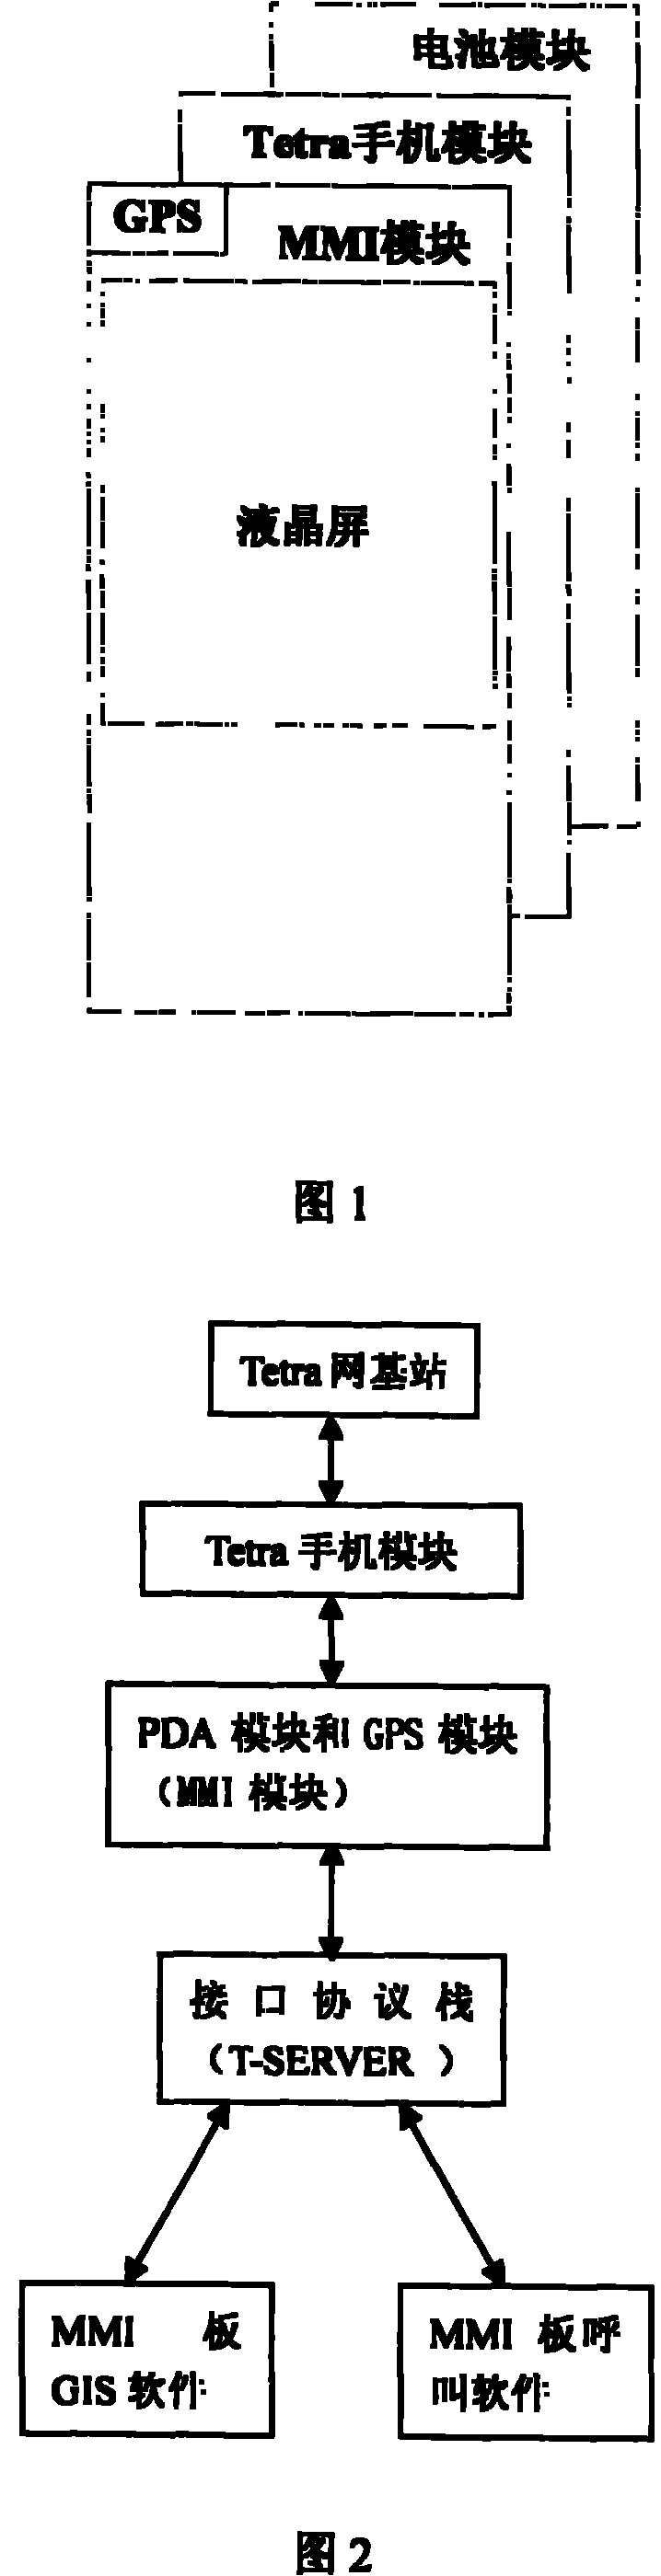 Tetra mobile phone integrating GIS and PDA functions and implementation method thereof